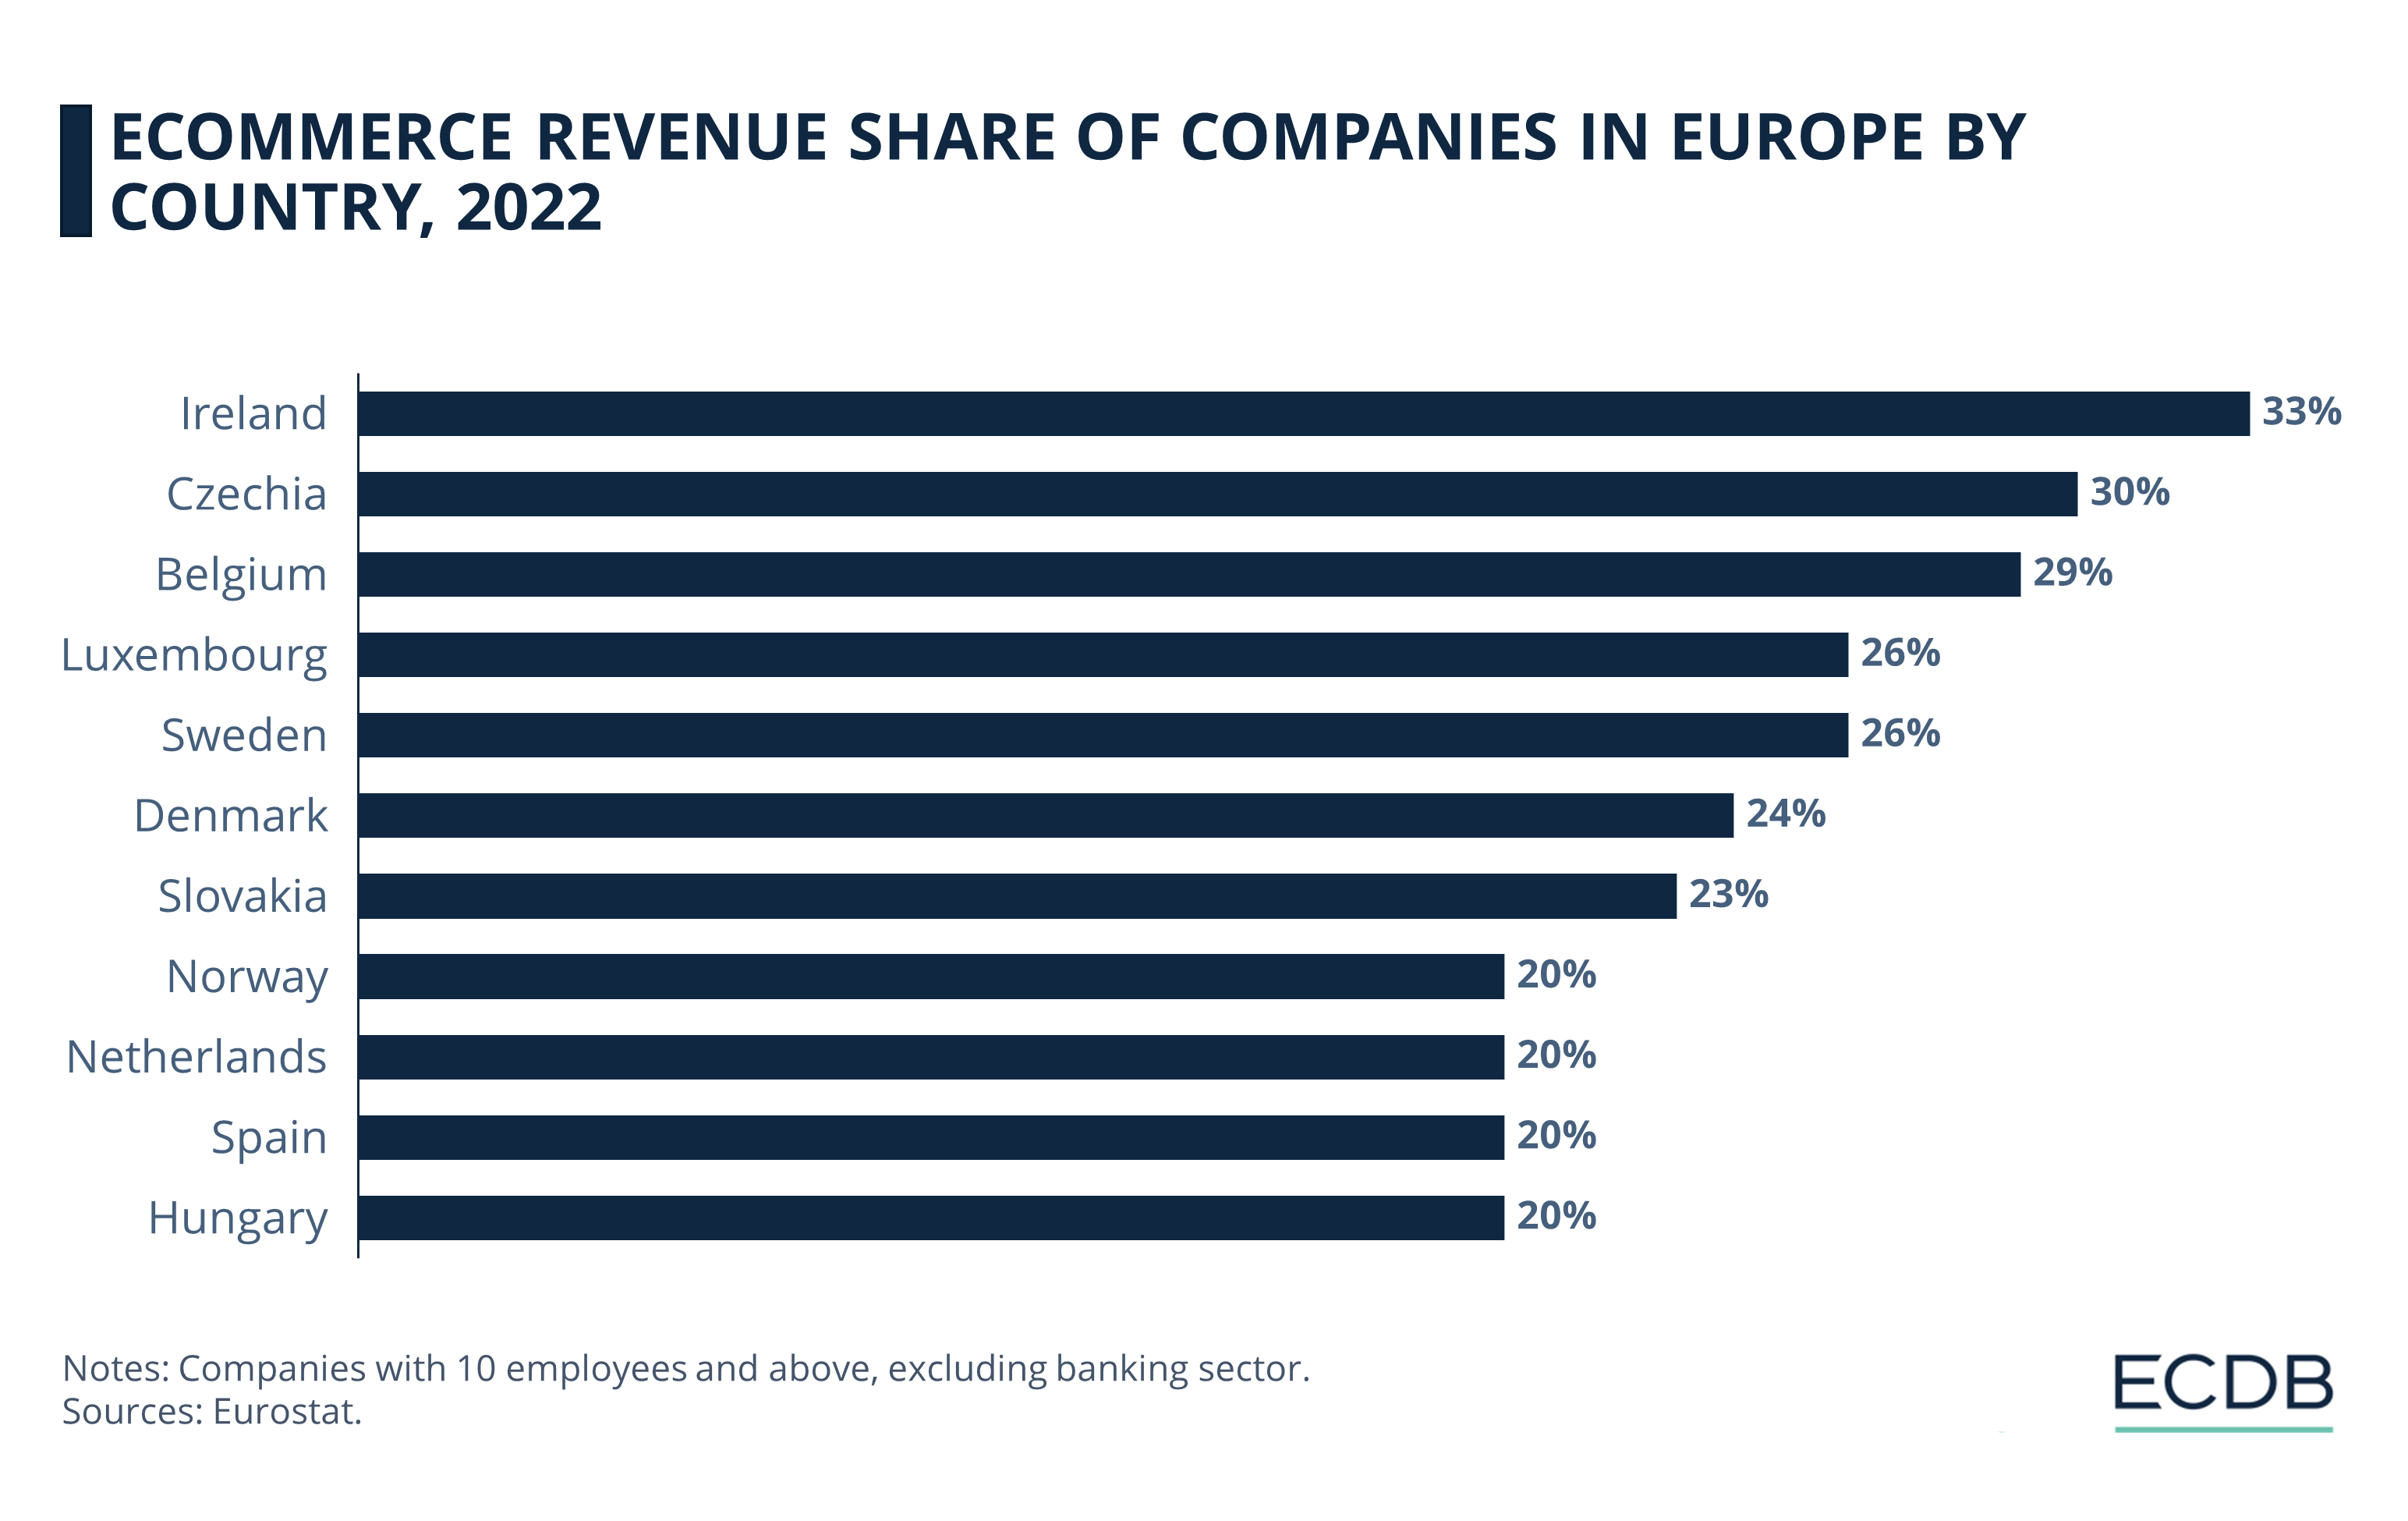 eCommerce Revenue Share of Companies in Europe by Country, 2022